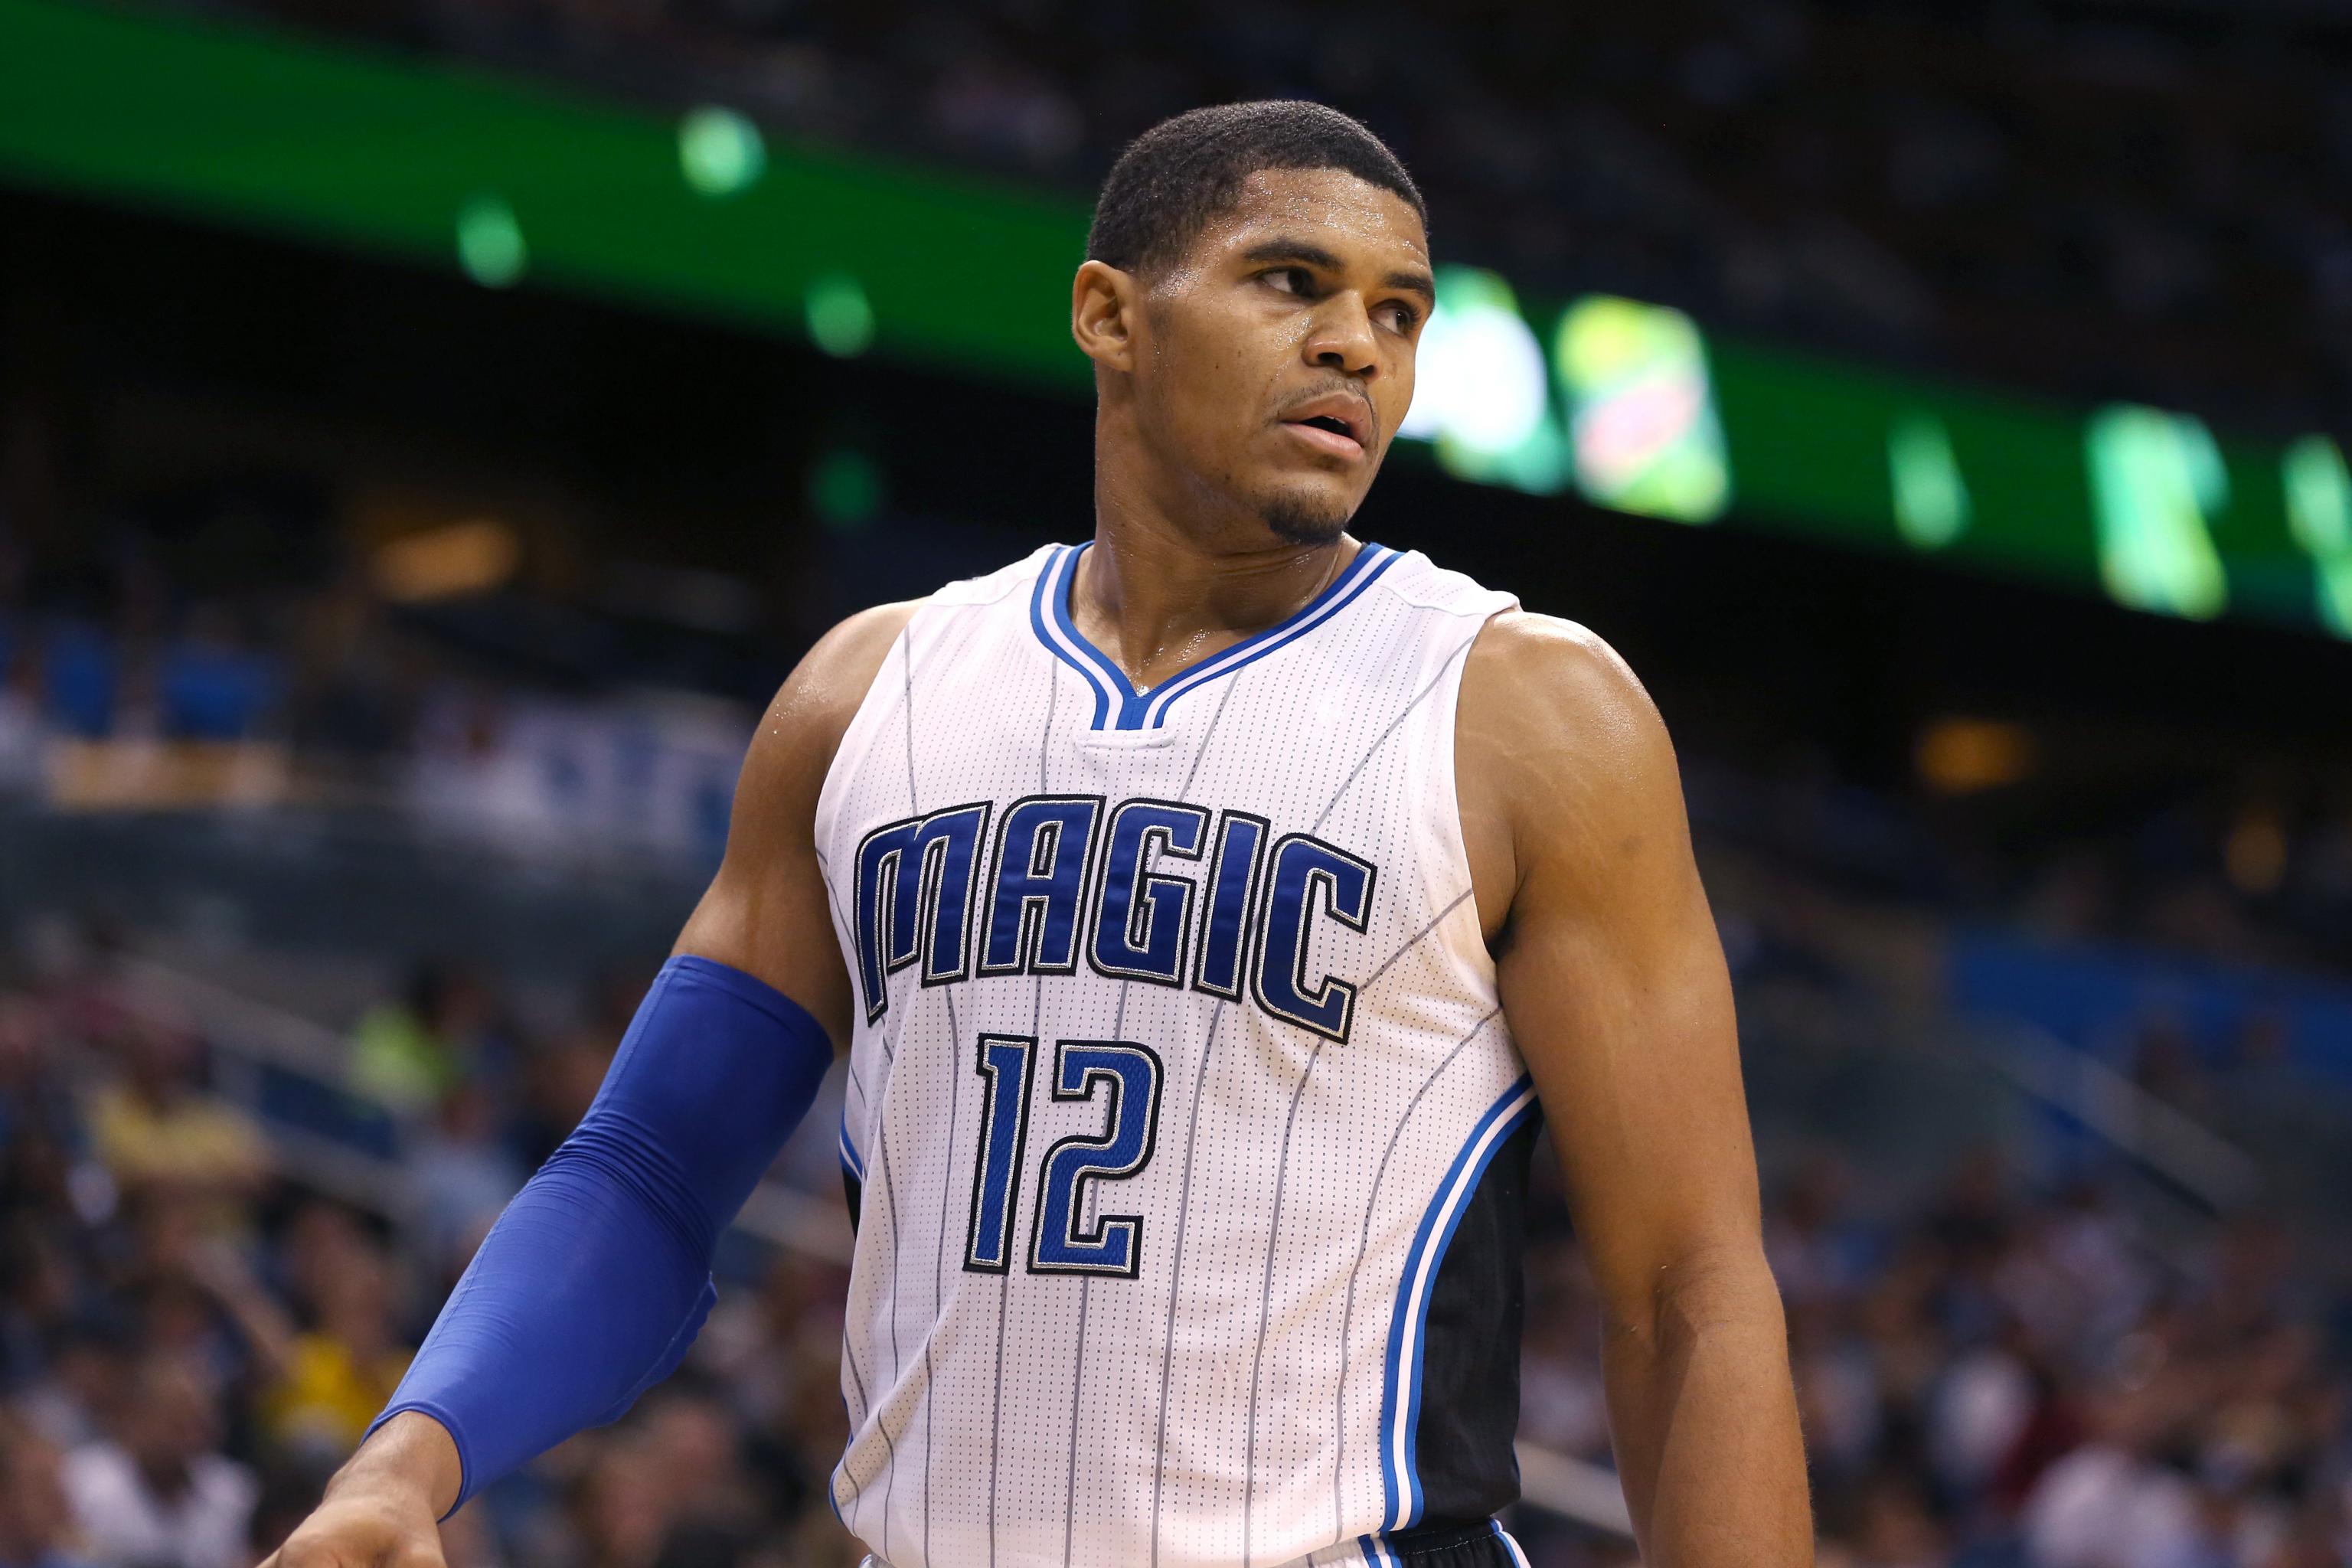 Magic practice notebook: Tobias Harris says he is a couple weeks away -  Orlando Pinstriped Post